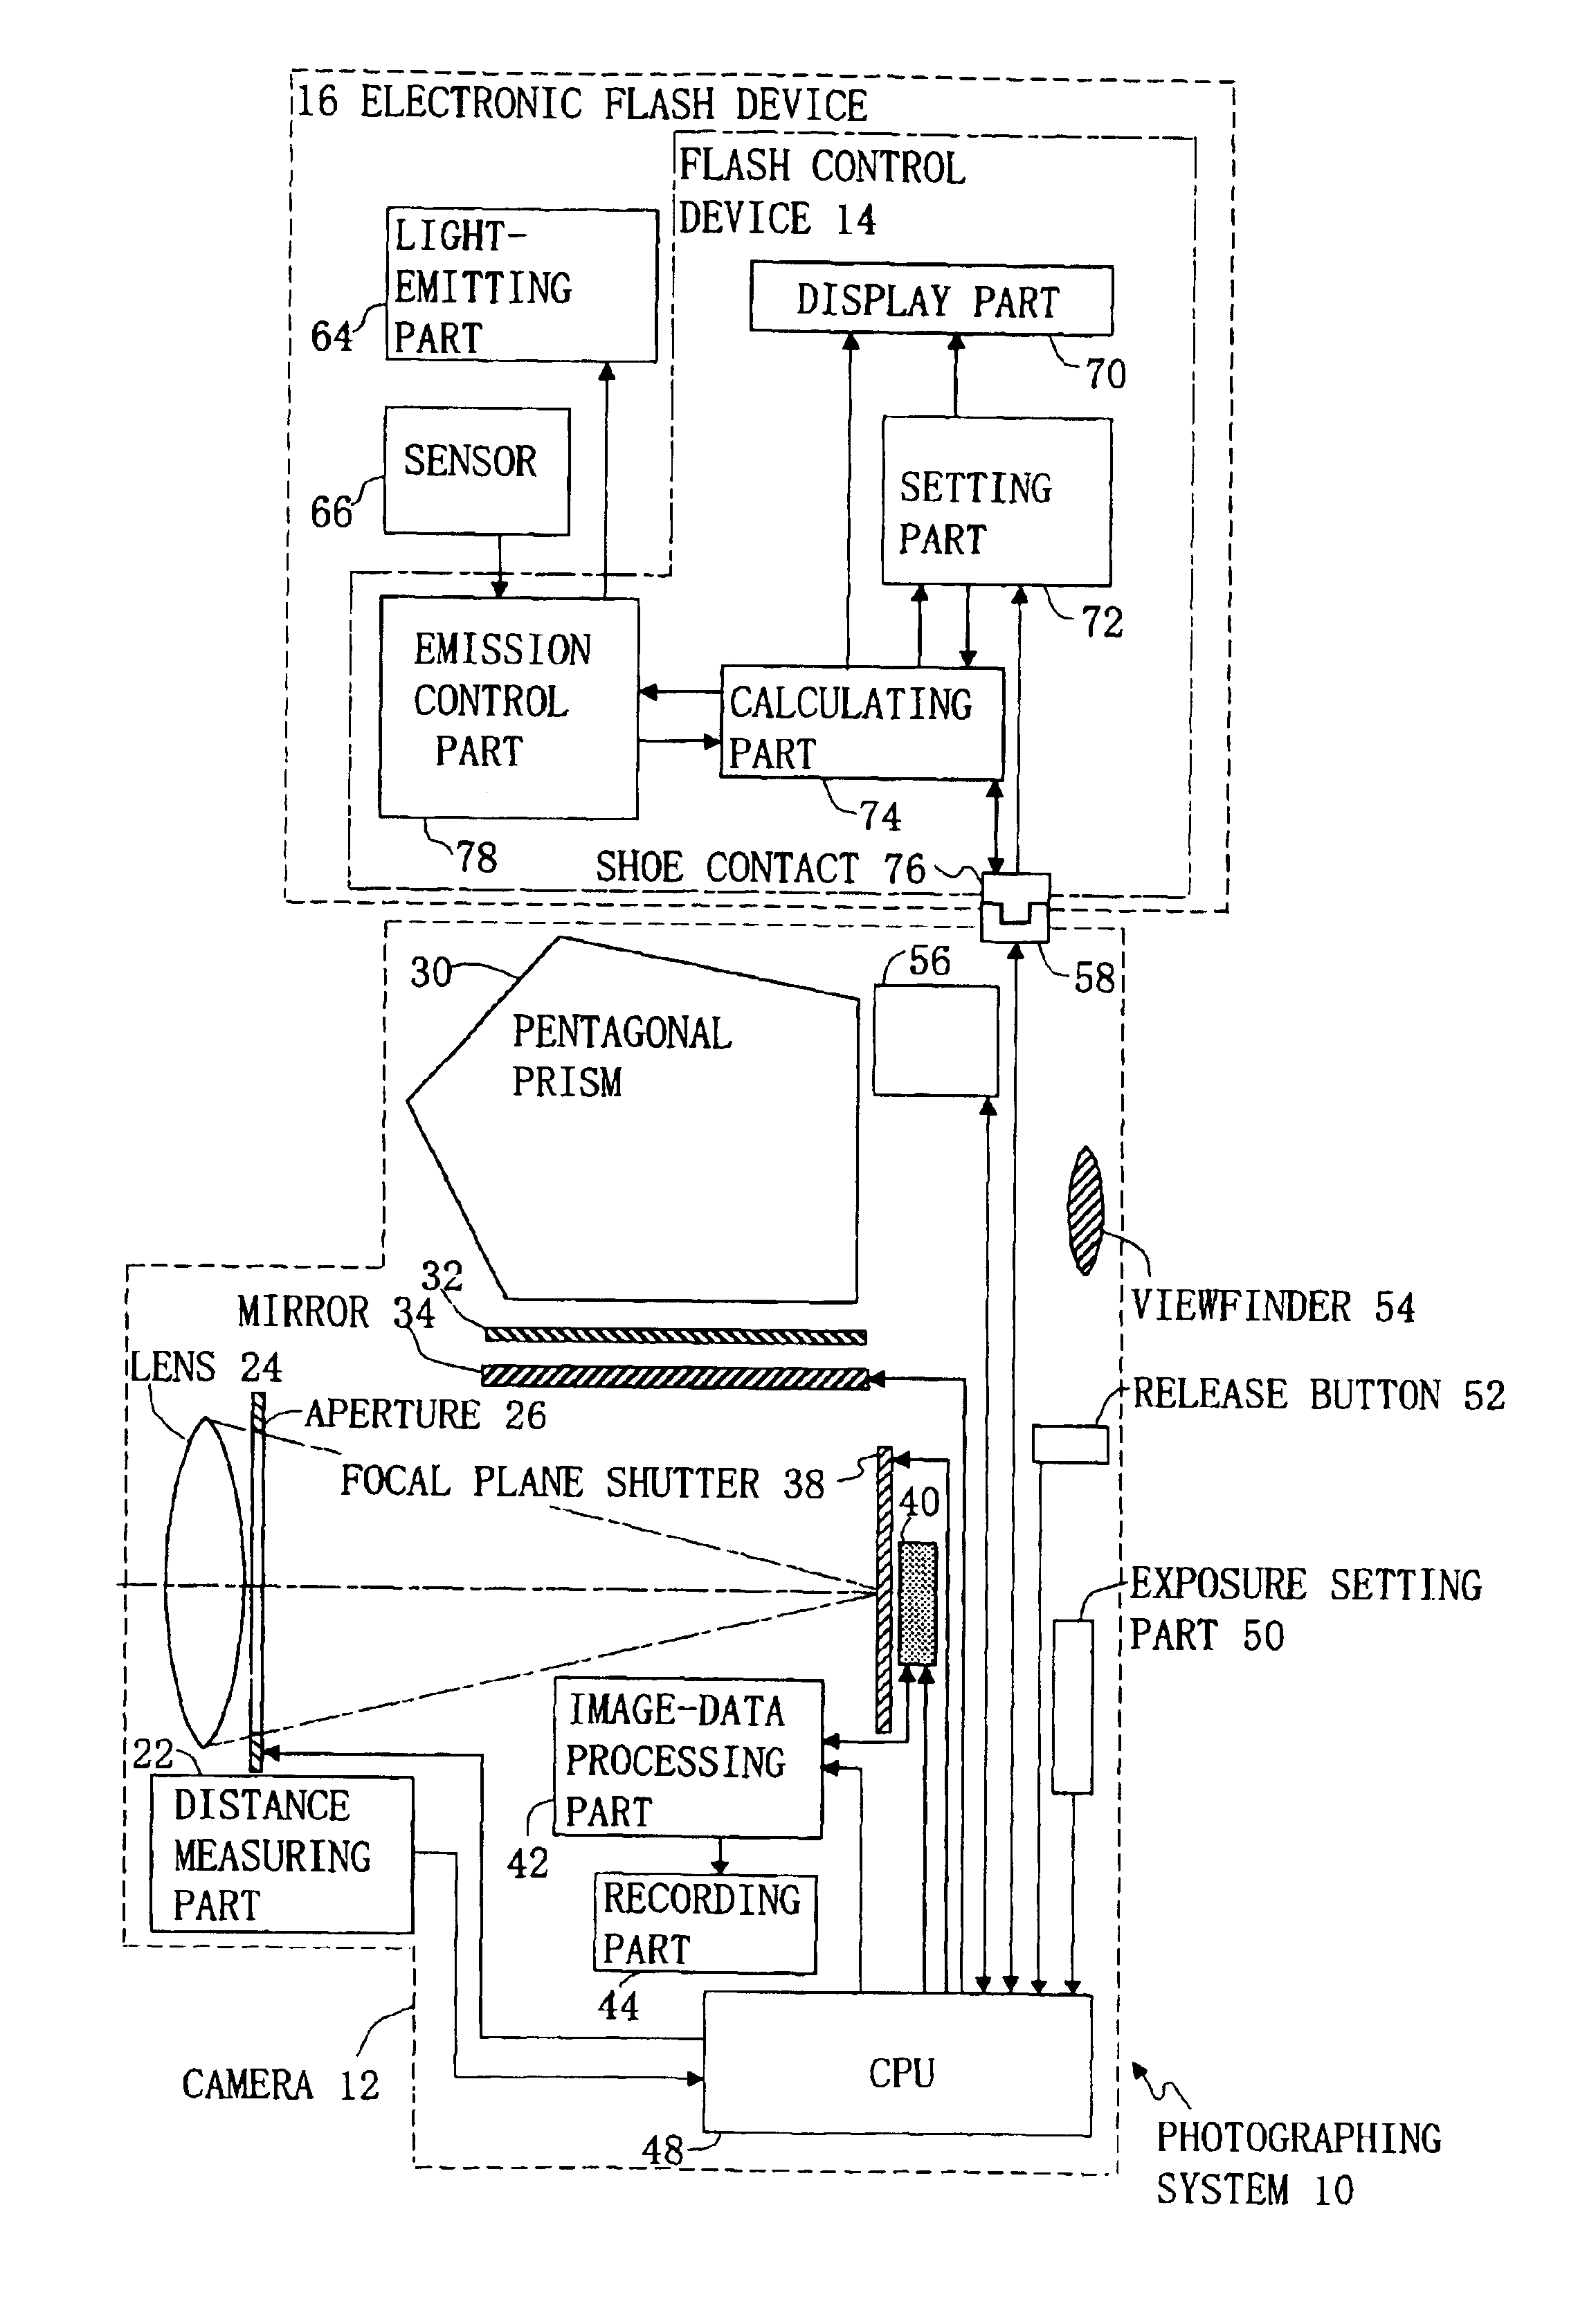 Flash control device, electronic flash device, and photographing system